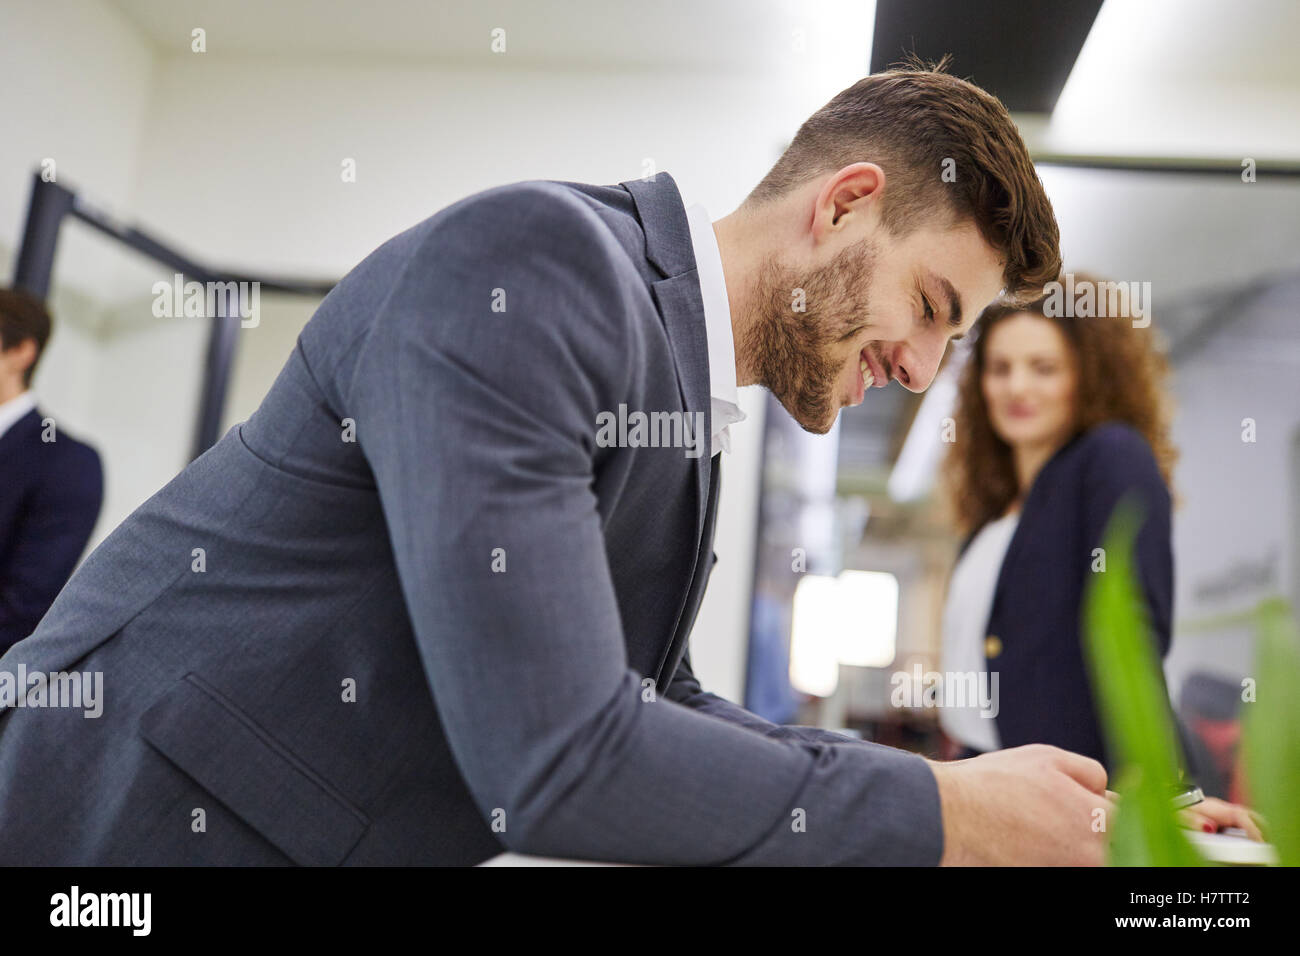 Man as manager reading SMS and smiling with joy Stock Photo